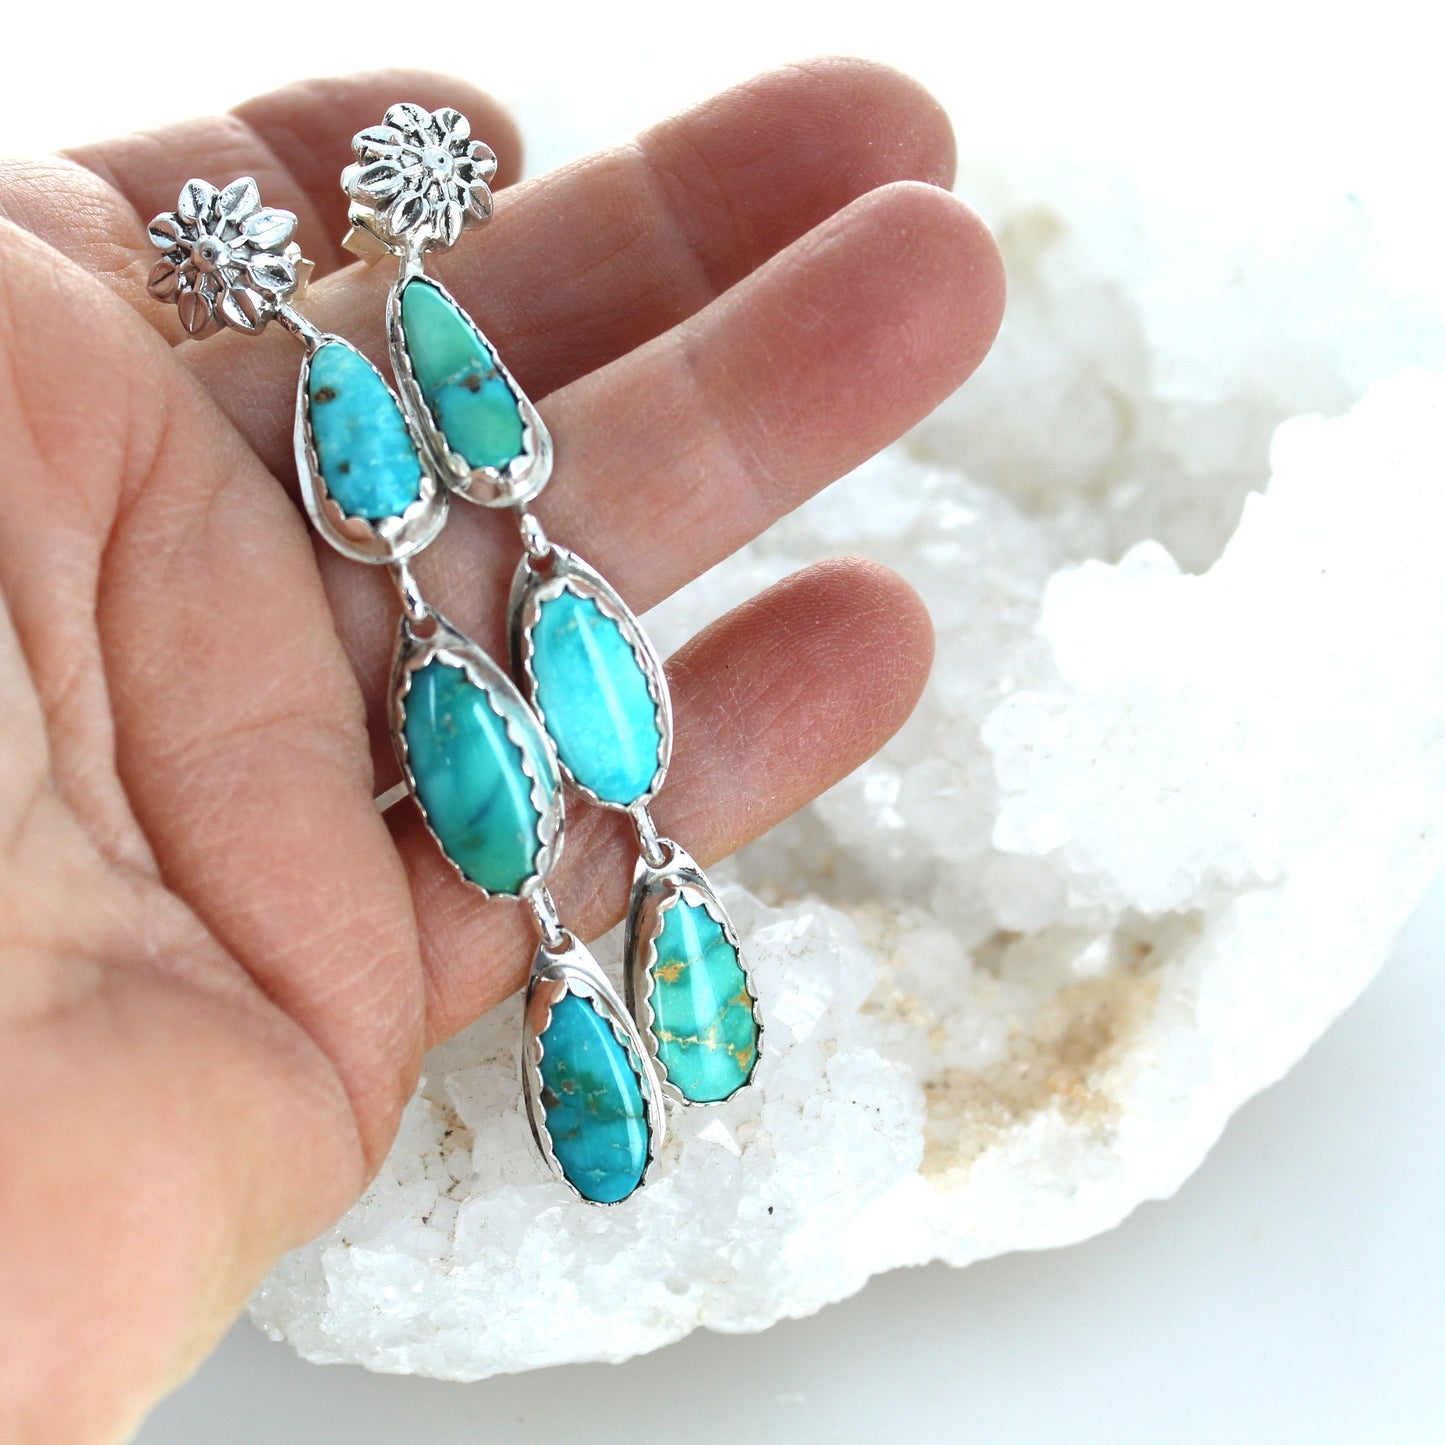 Emerald Valley Turquoise Earrings 3 Stone Dangles Floral Post -NewWorldGems